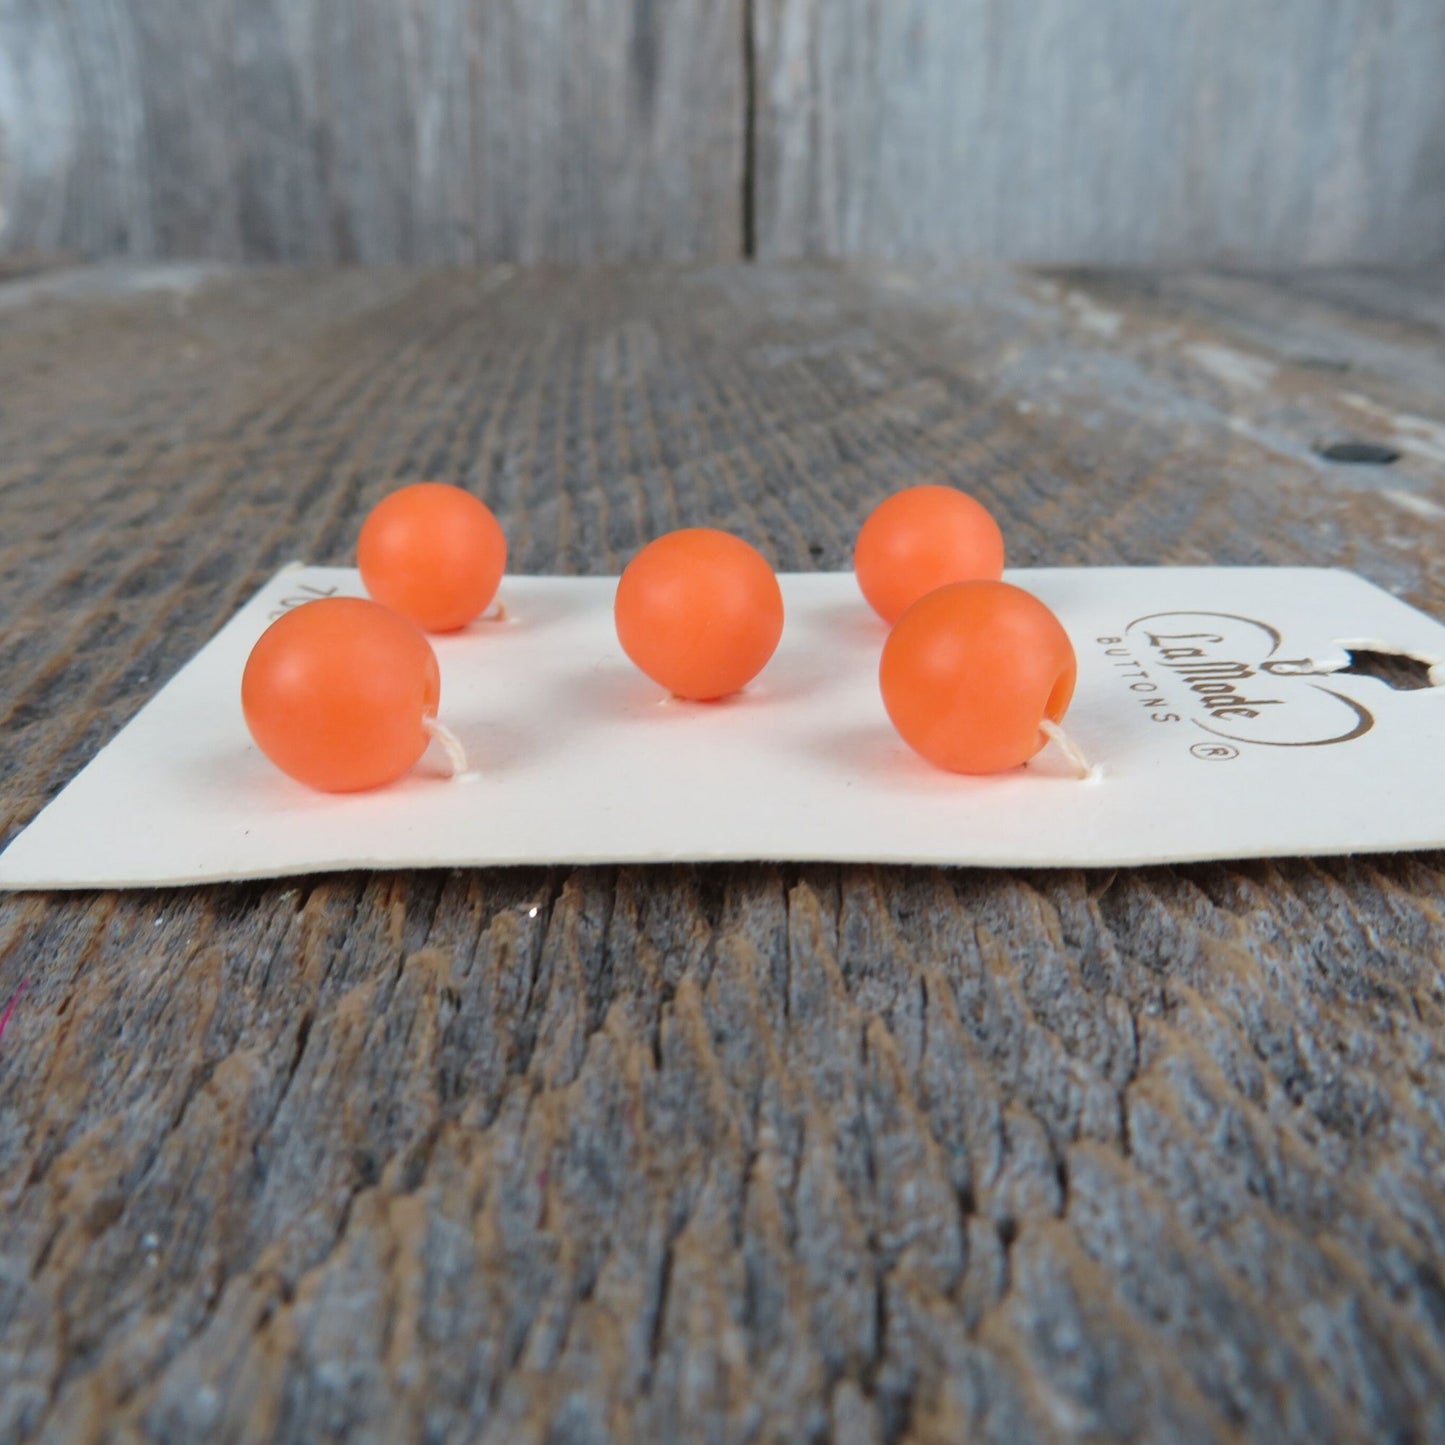 Peach Orange Ball Buttons La Mode Vintage size 16 or 3/8th inch # 1804 Made in Japan